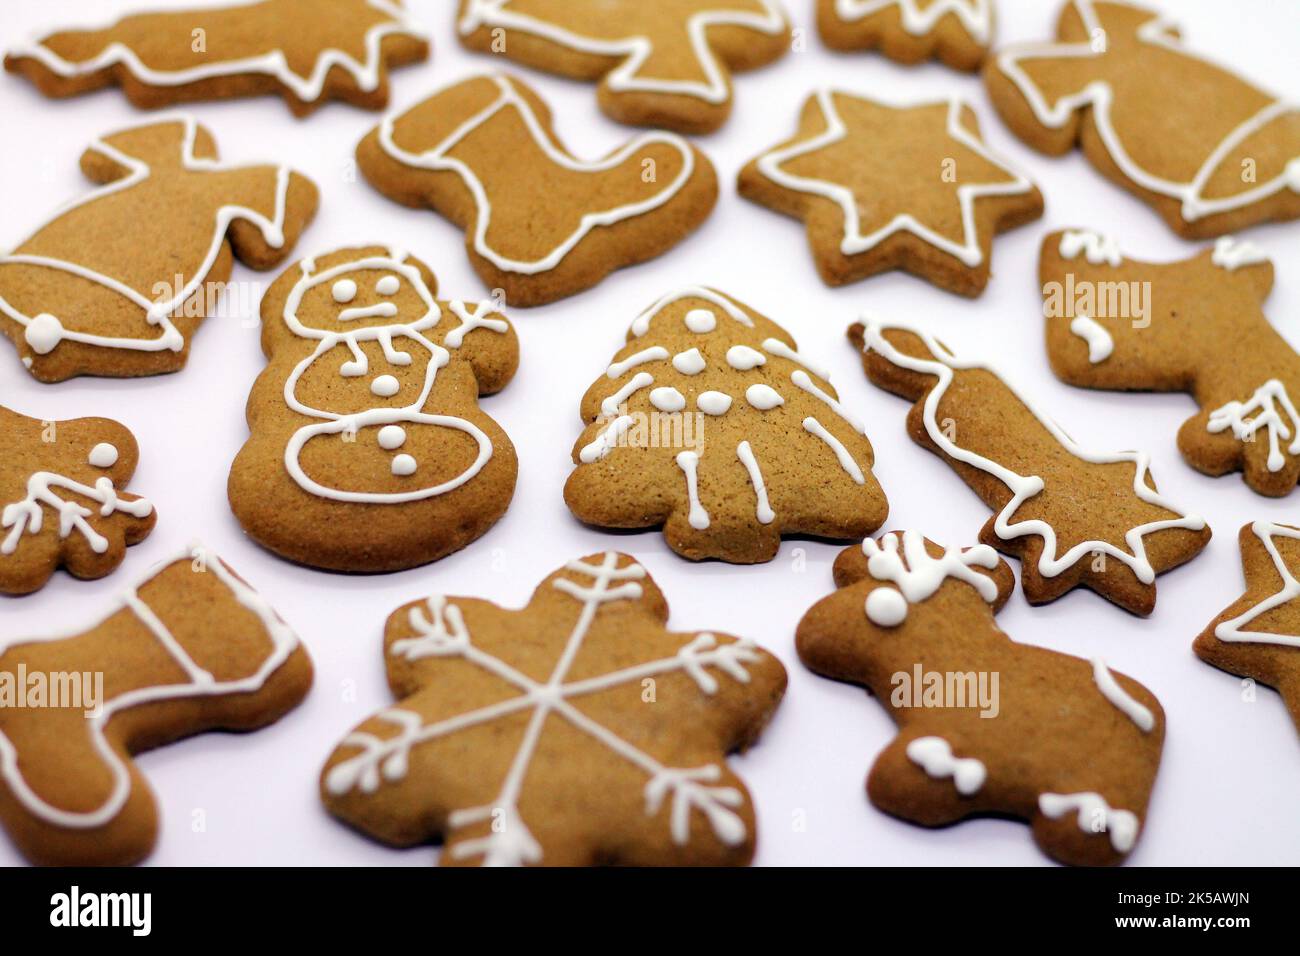 Christmas gingerbread homemade on white background. Stock Photo